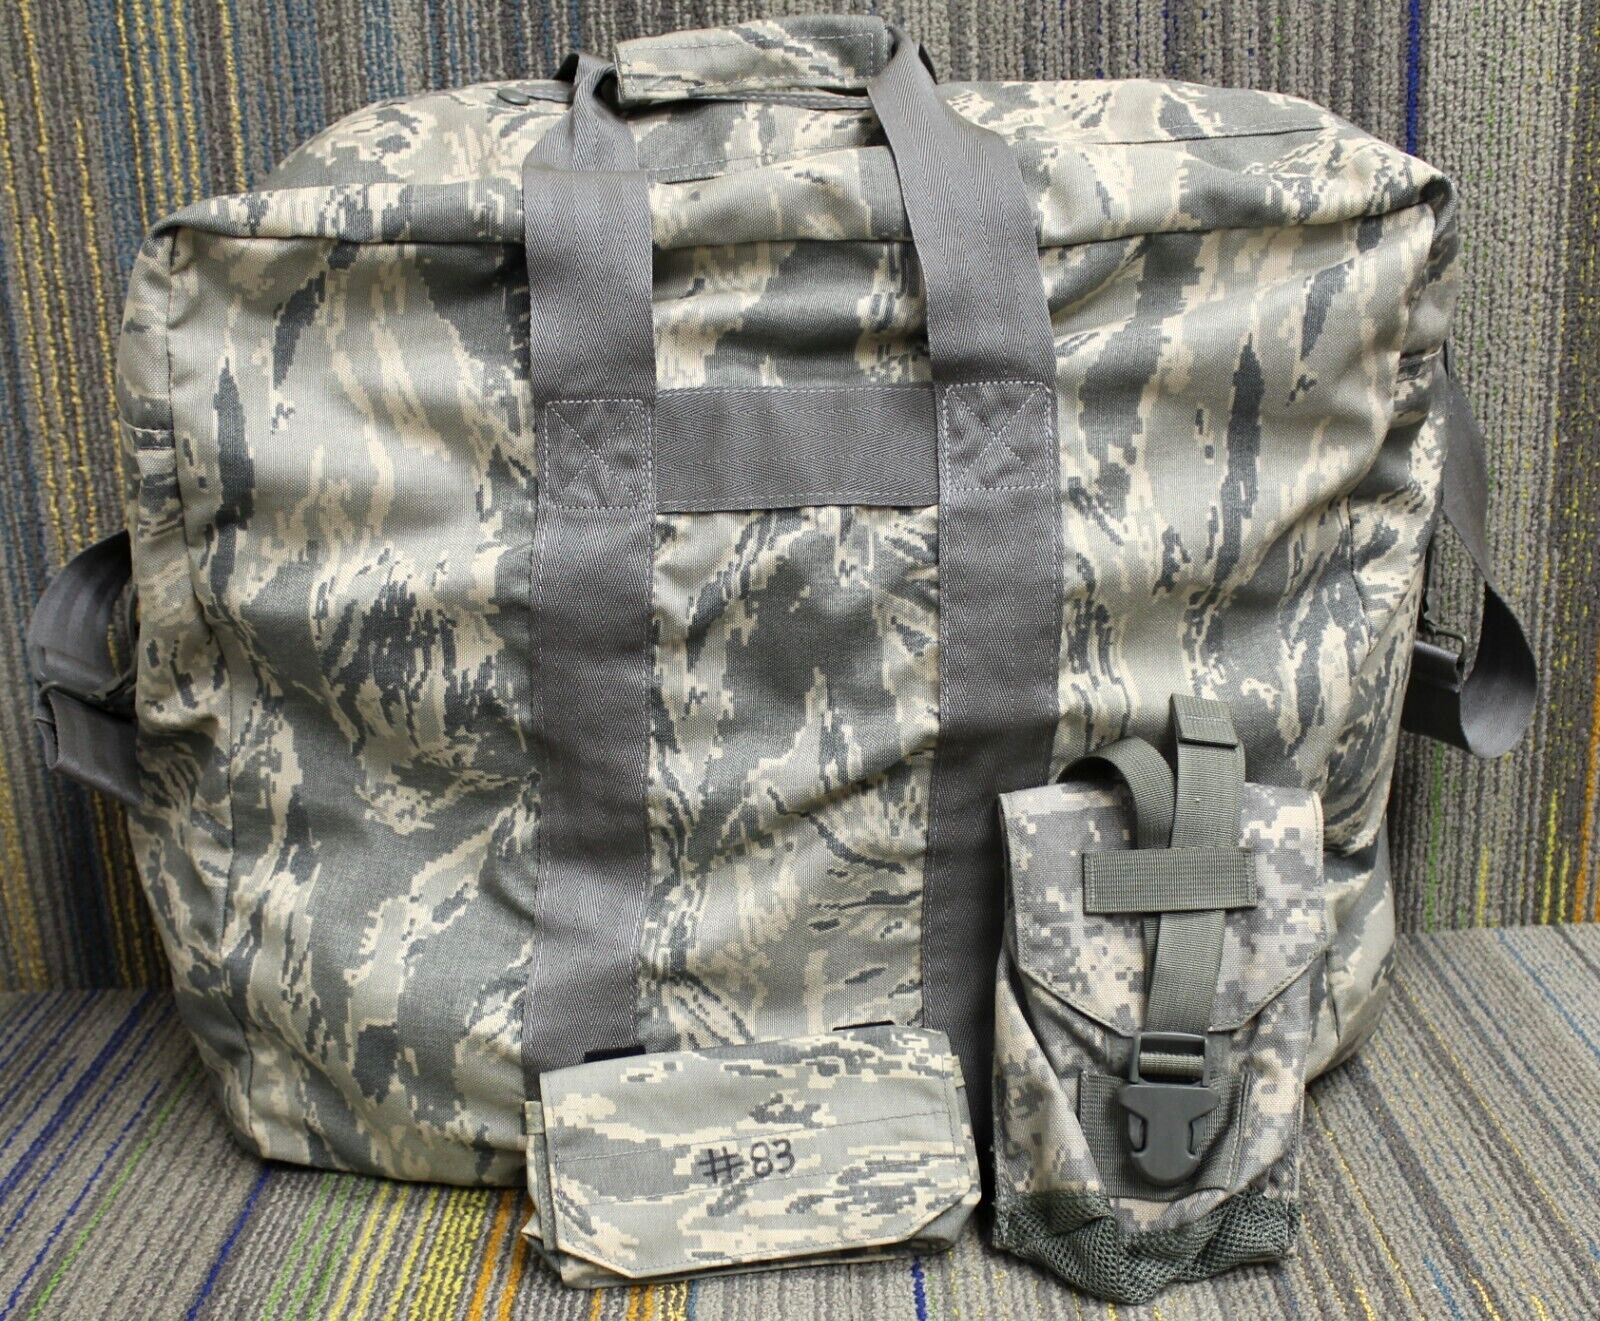 US Army Air Force Duffel and Pouch Bundle Surplus Bag Lot